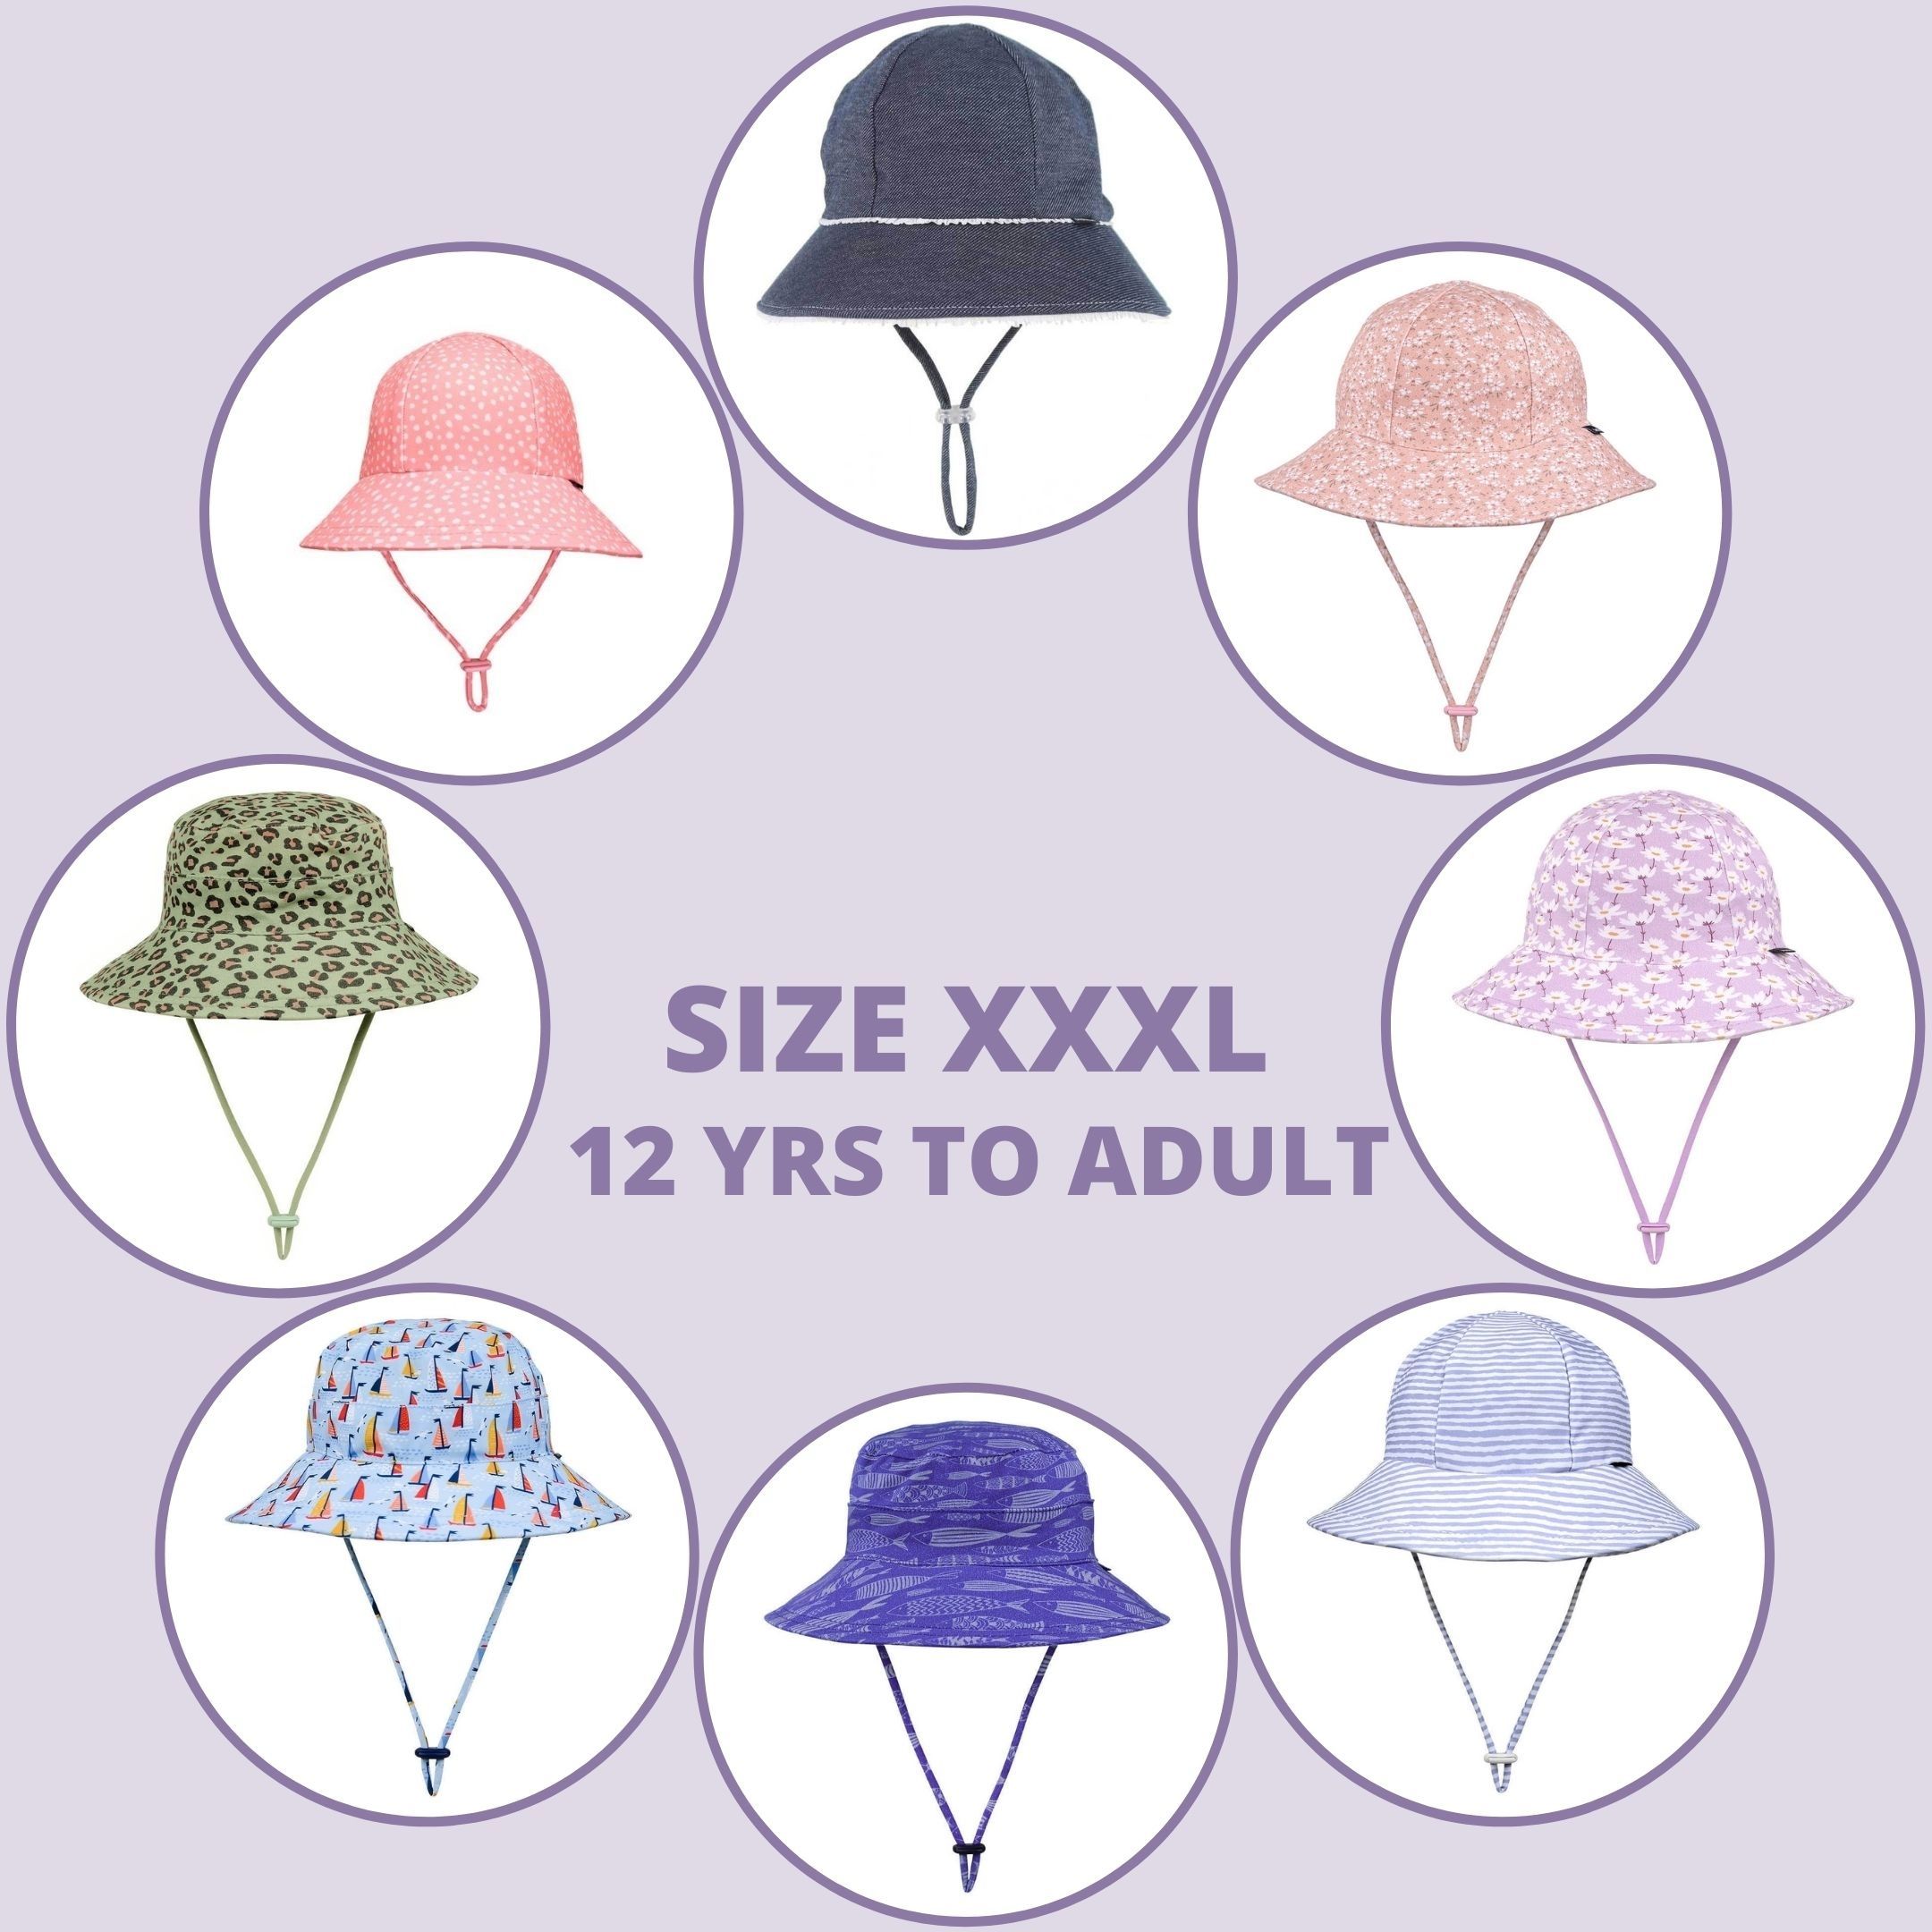 Bedhead - Hats - Size - XXXL - 58cm - 12 years and up including adult